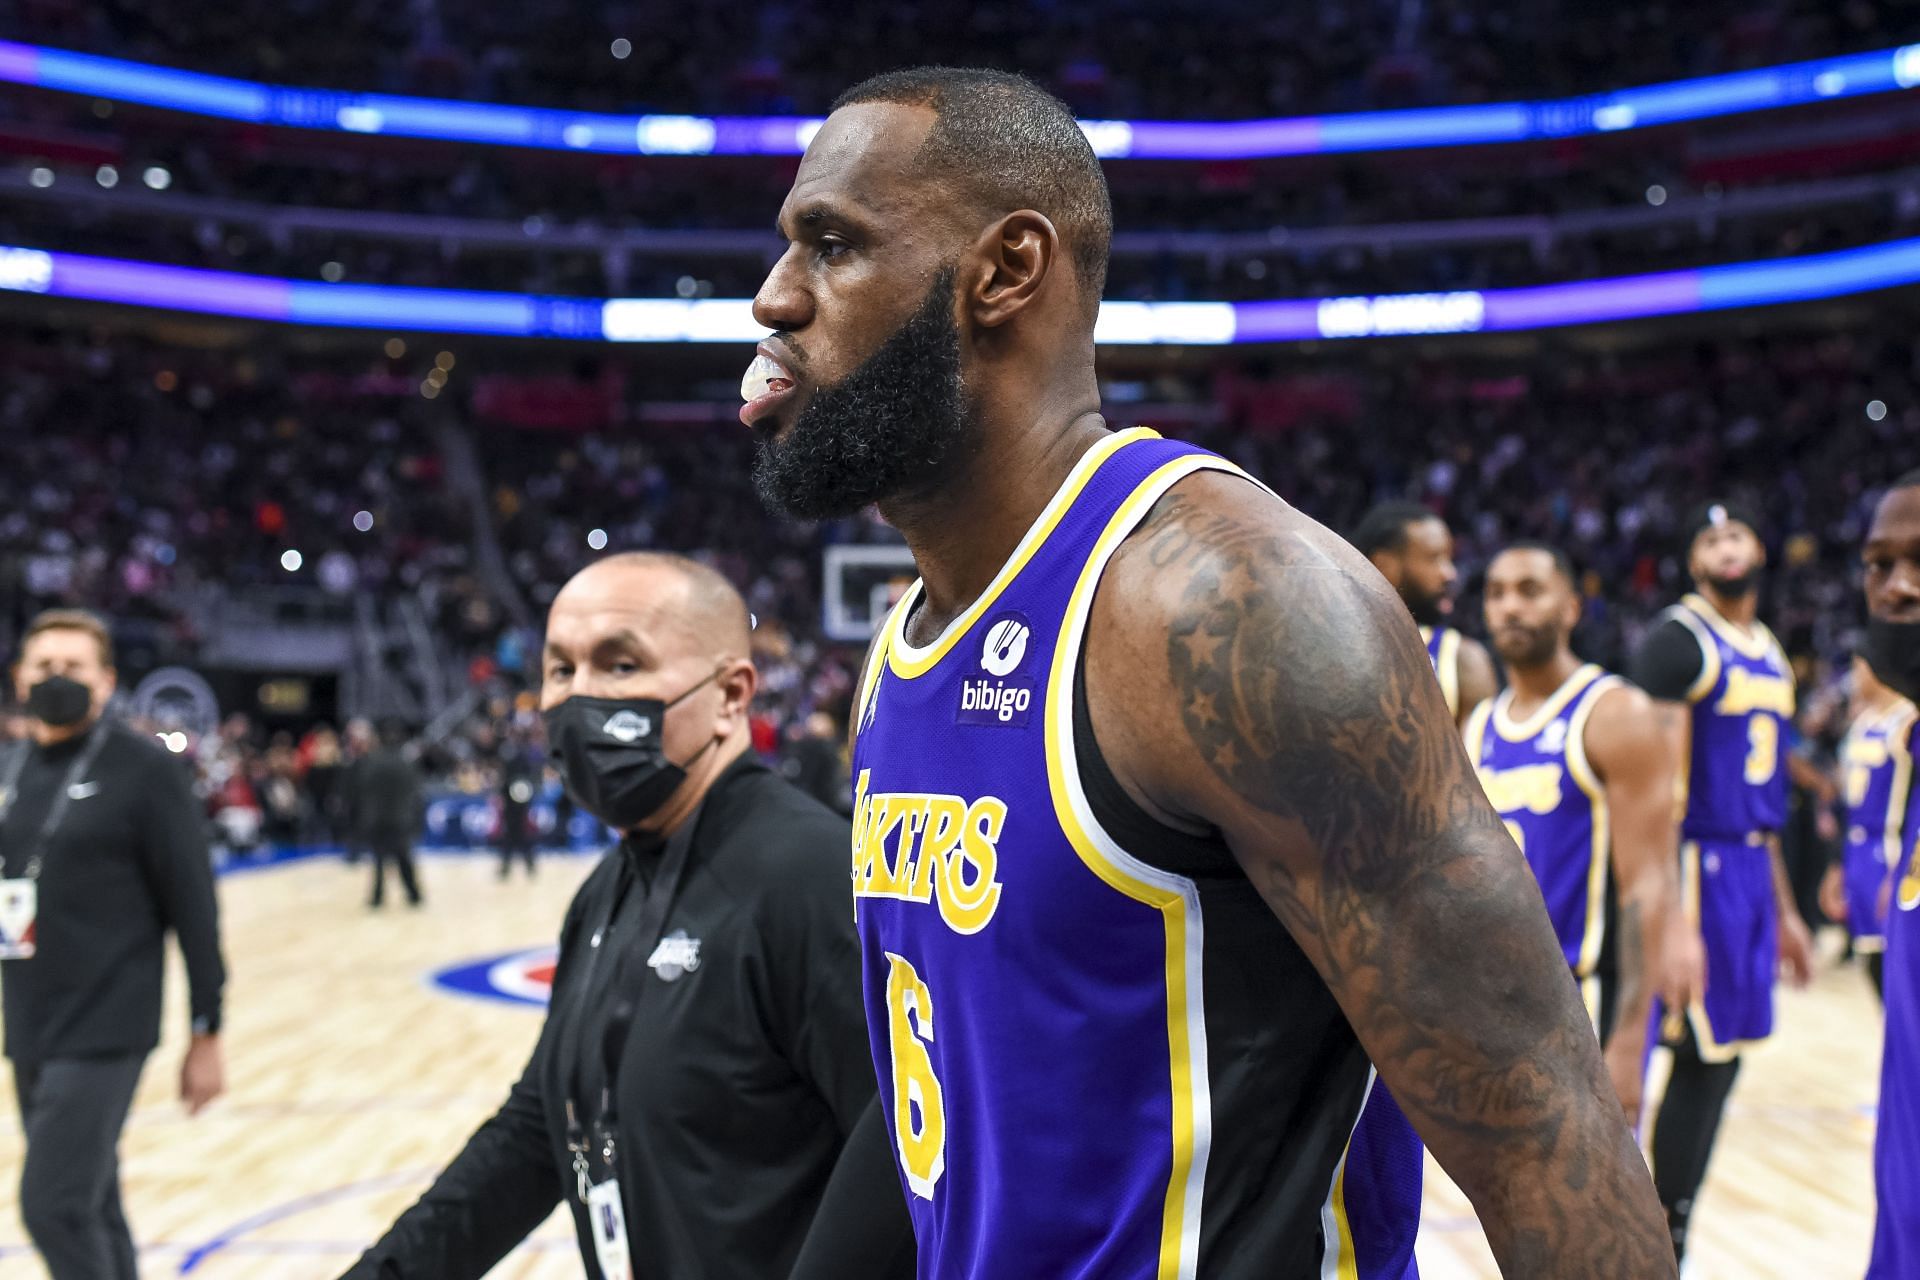 LeBron James is ejected during the LA Lakers vs Detroit Pistons game.